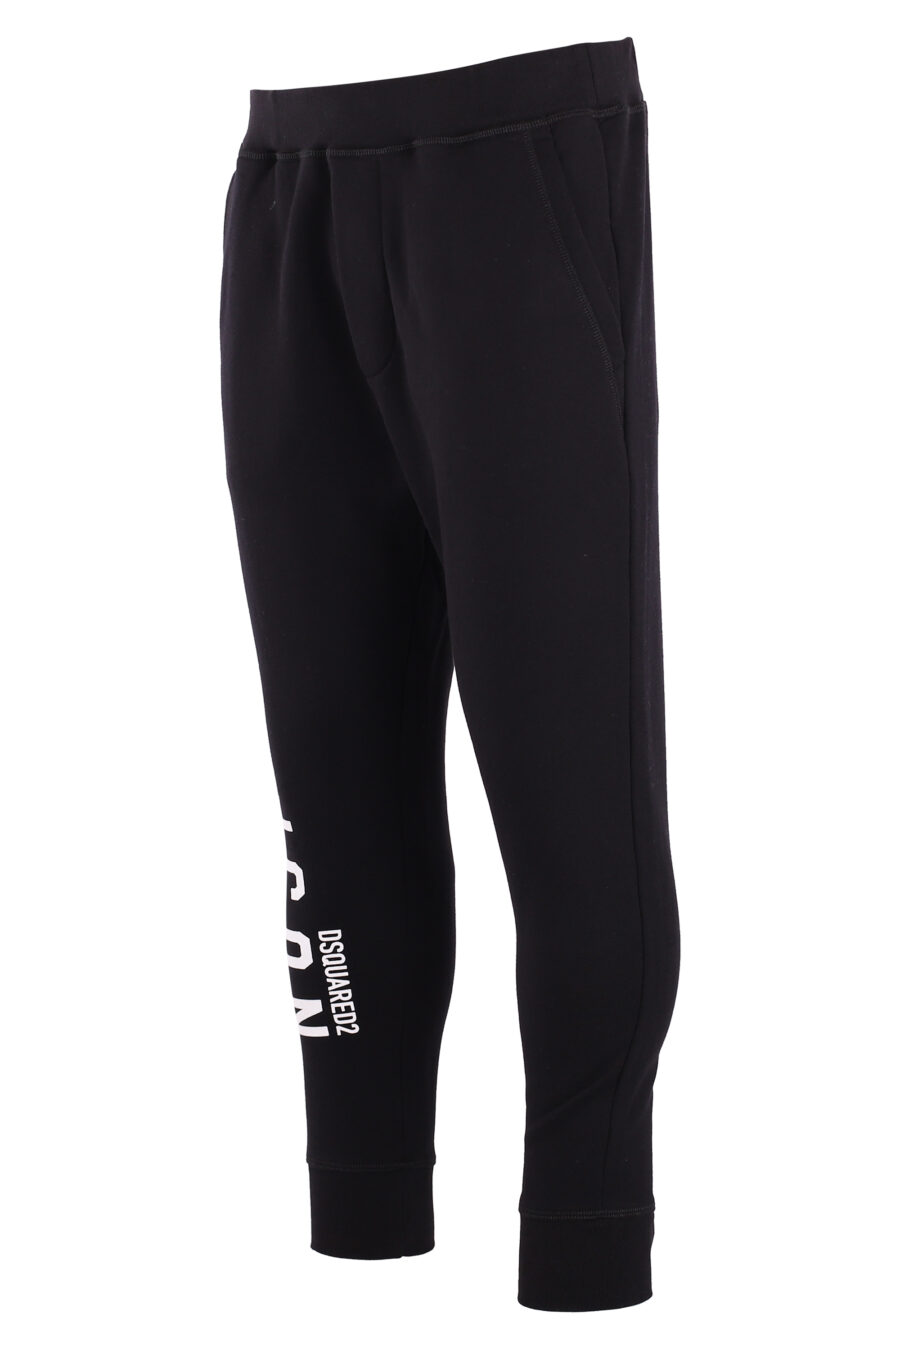 Tracksuit bottoms black "icon ski" with white vertical double logo - IMG 8971